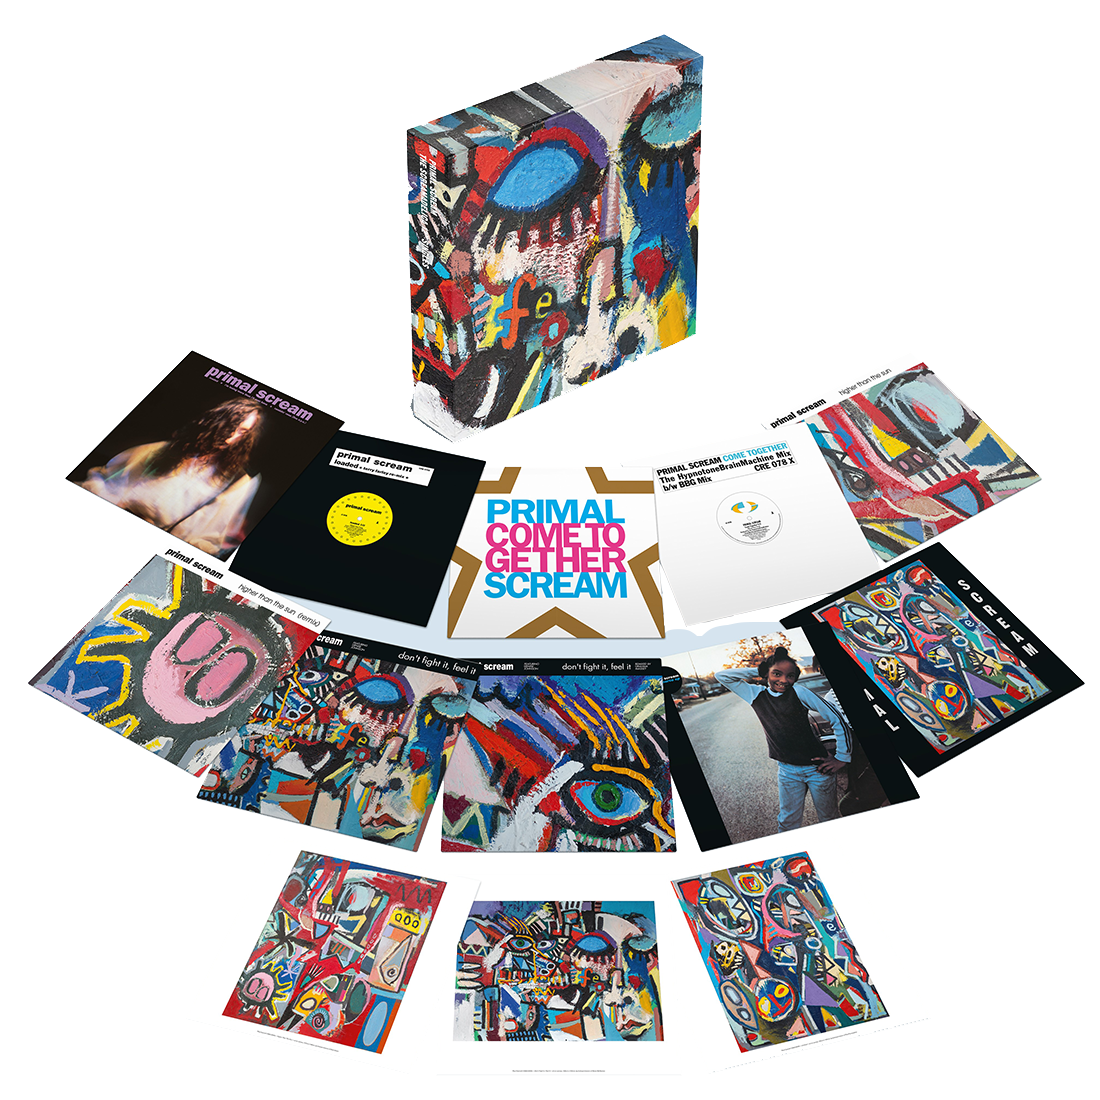 Screamadelica (30th Anniversary): Limited Edition 12” Singles Box Set